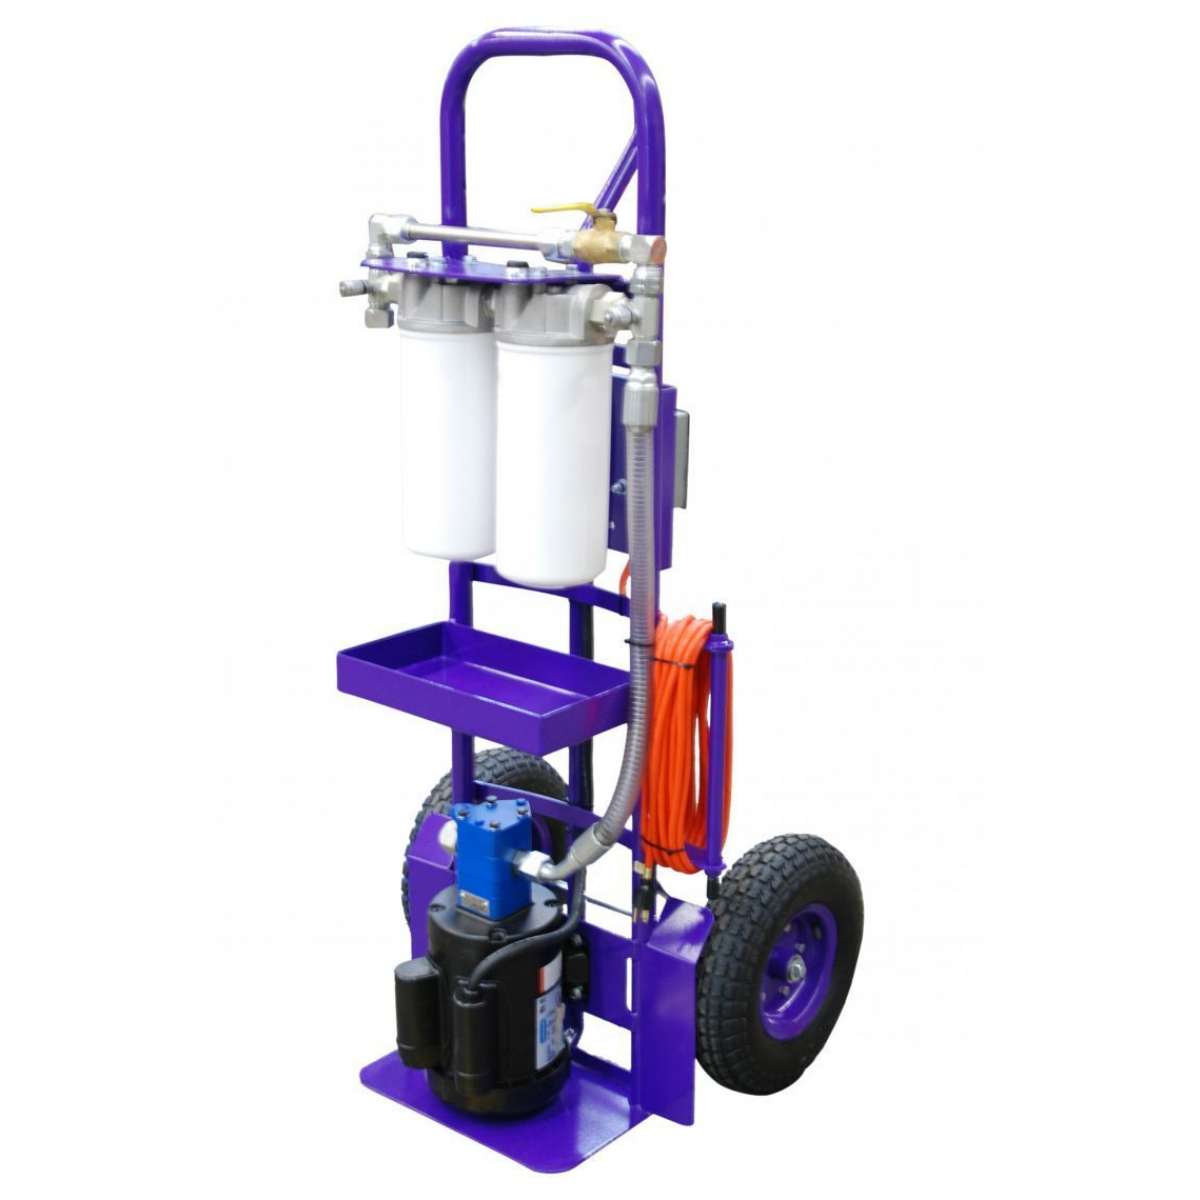 Better M Series FilterCart for Gear Oil 1HP 2GPM